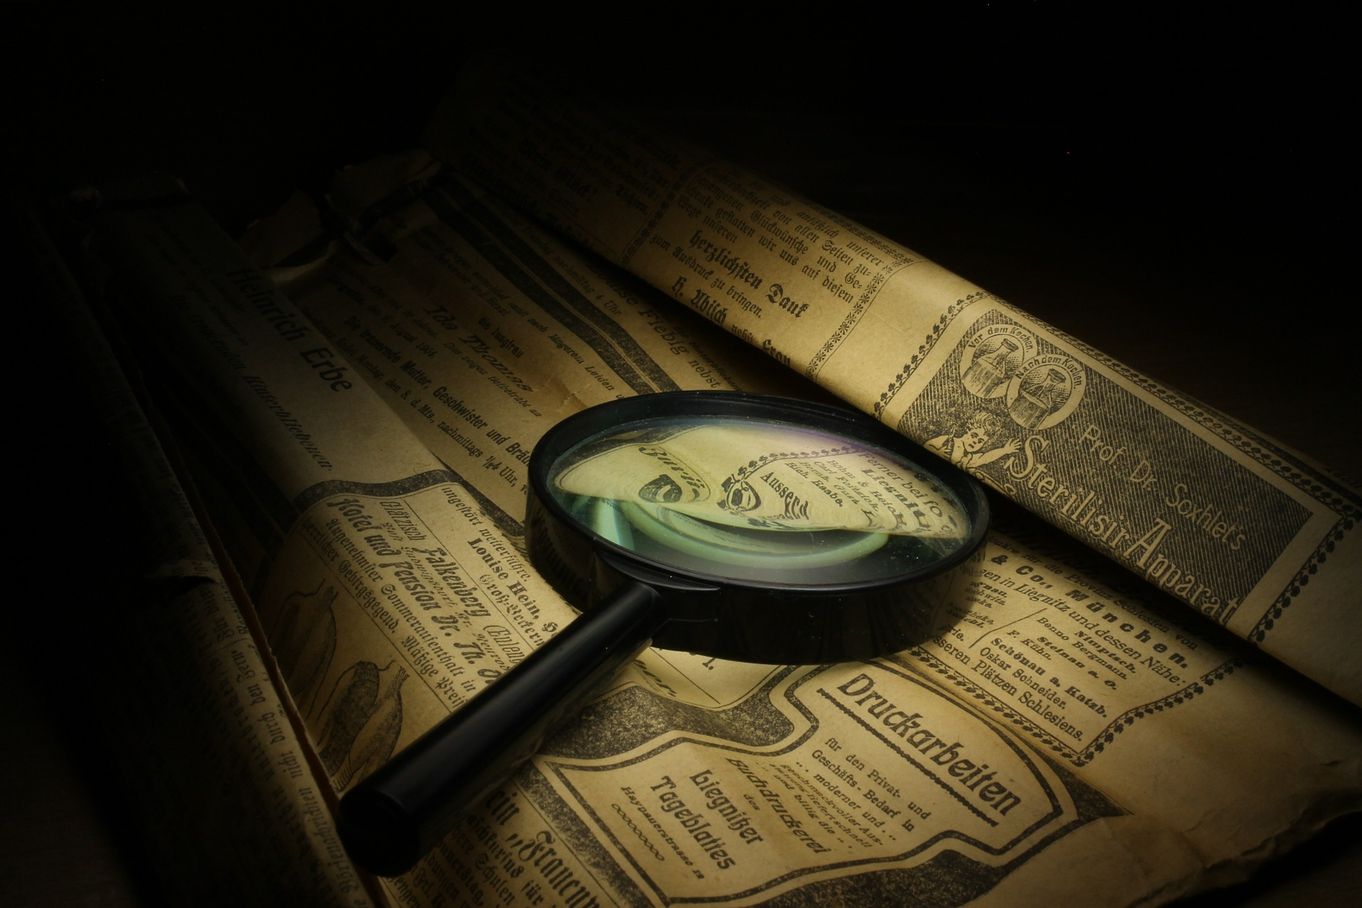 Magnifying glass on old newspaper